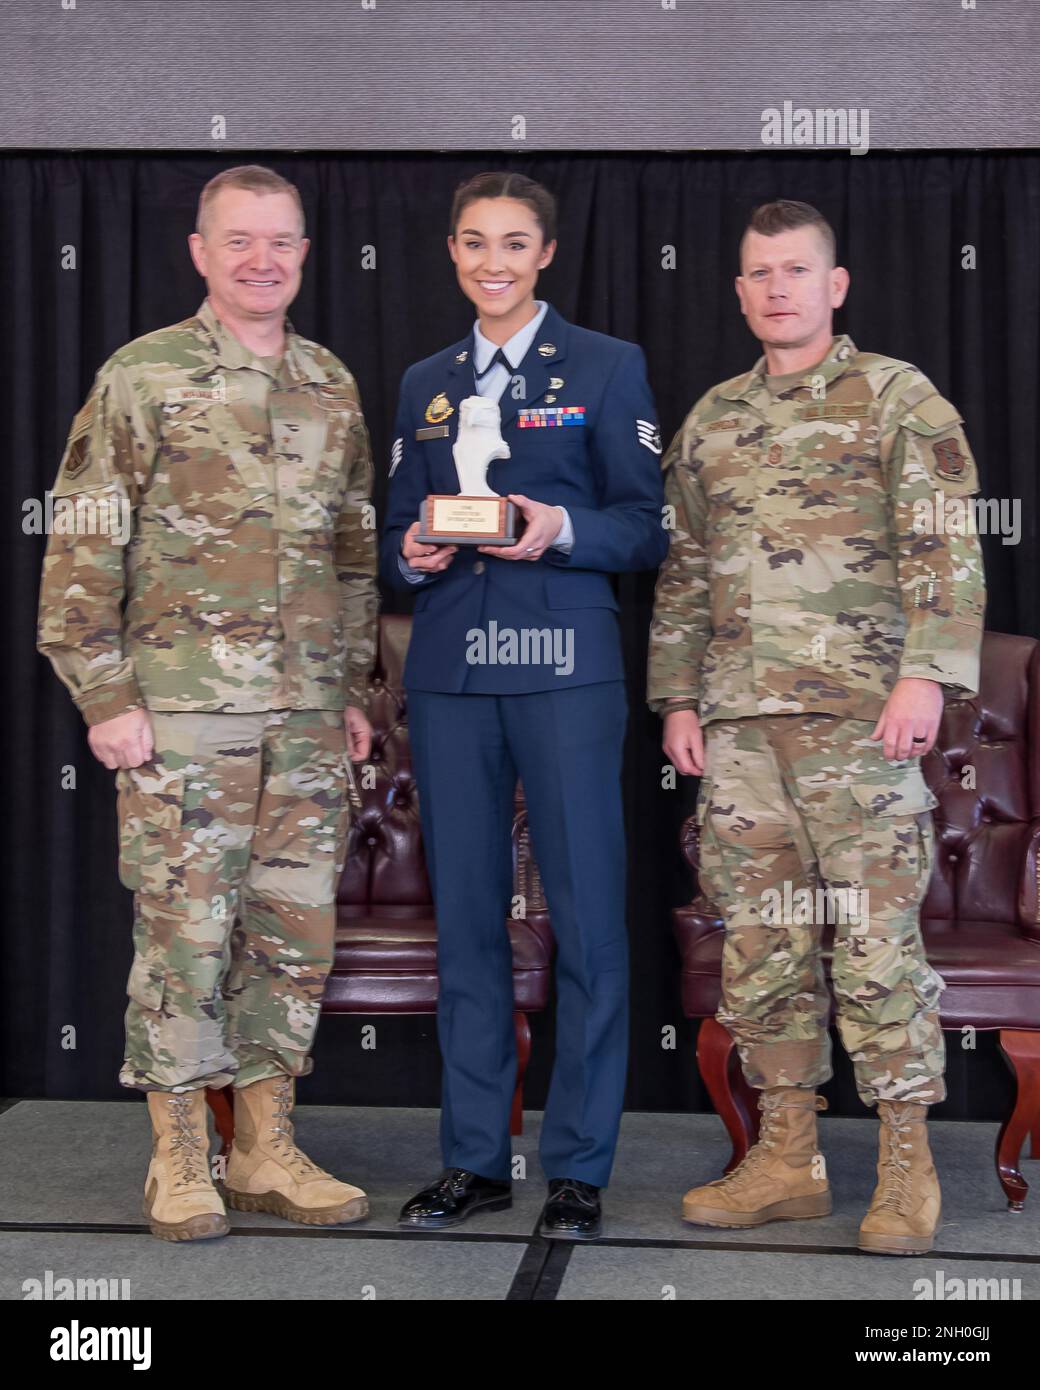 Brig. Gen. Rolf Mammen, 127th Wing Commander, Staff Sgt. Jenna Gleason, recruiter, 127th Mission Support Group and Chief Master Sgt. Rick Gordon, 127th Wing command chief, based in Selfridge Air National Guard Base, Michigan, pose after awarding Gleason the Wing’s outstanding recruiter of the year award. Gleason and seven other individuals were awarded in different categories and will advance to the Michigan Air National Guard competition. Stock Photo